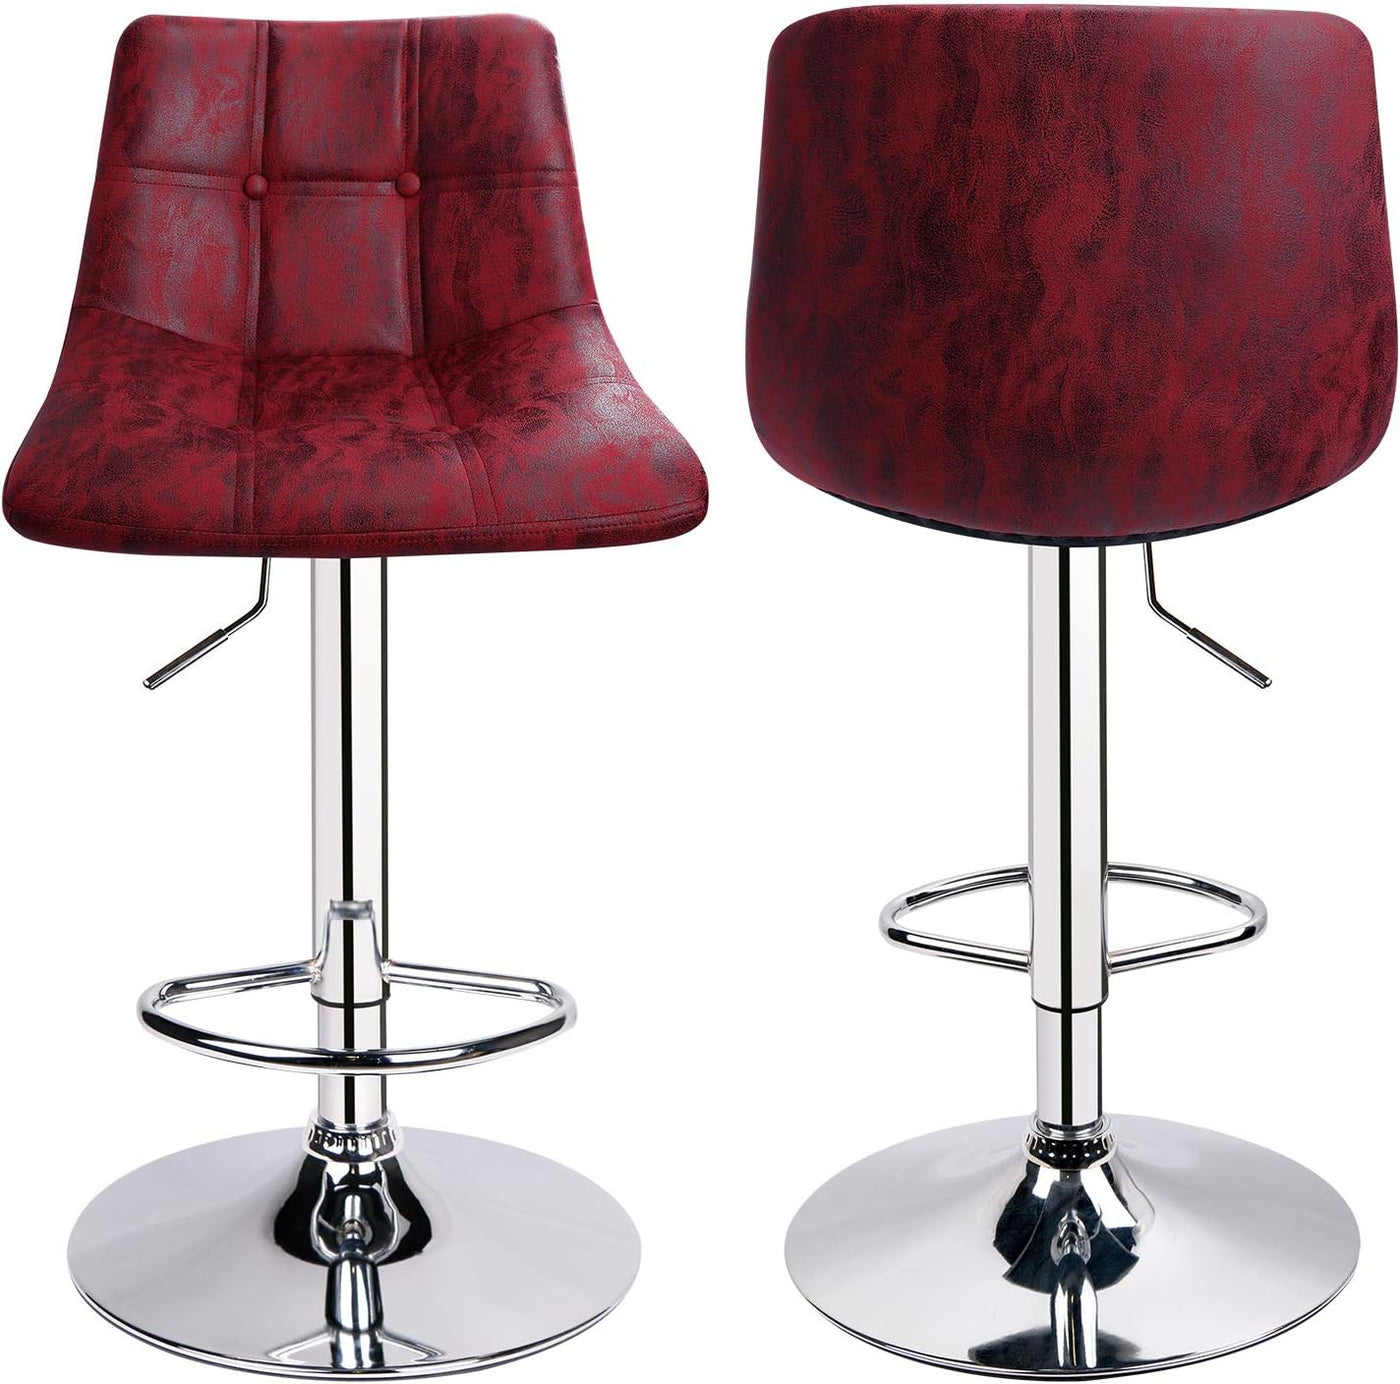 Adjustable Swivel Bar Stools Set of 2 (Wine Red/hot-Stamping Cloth)